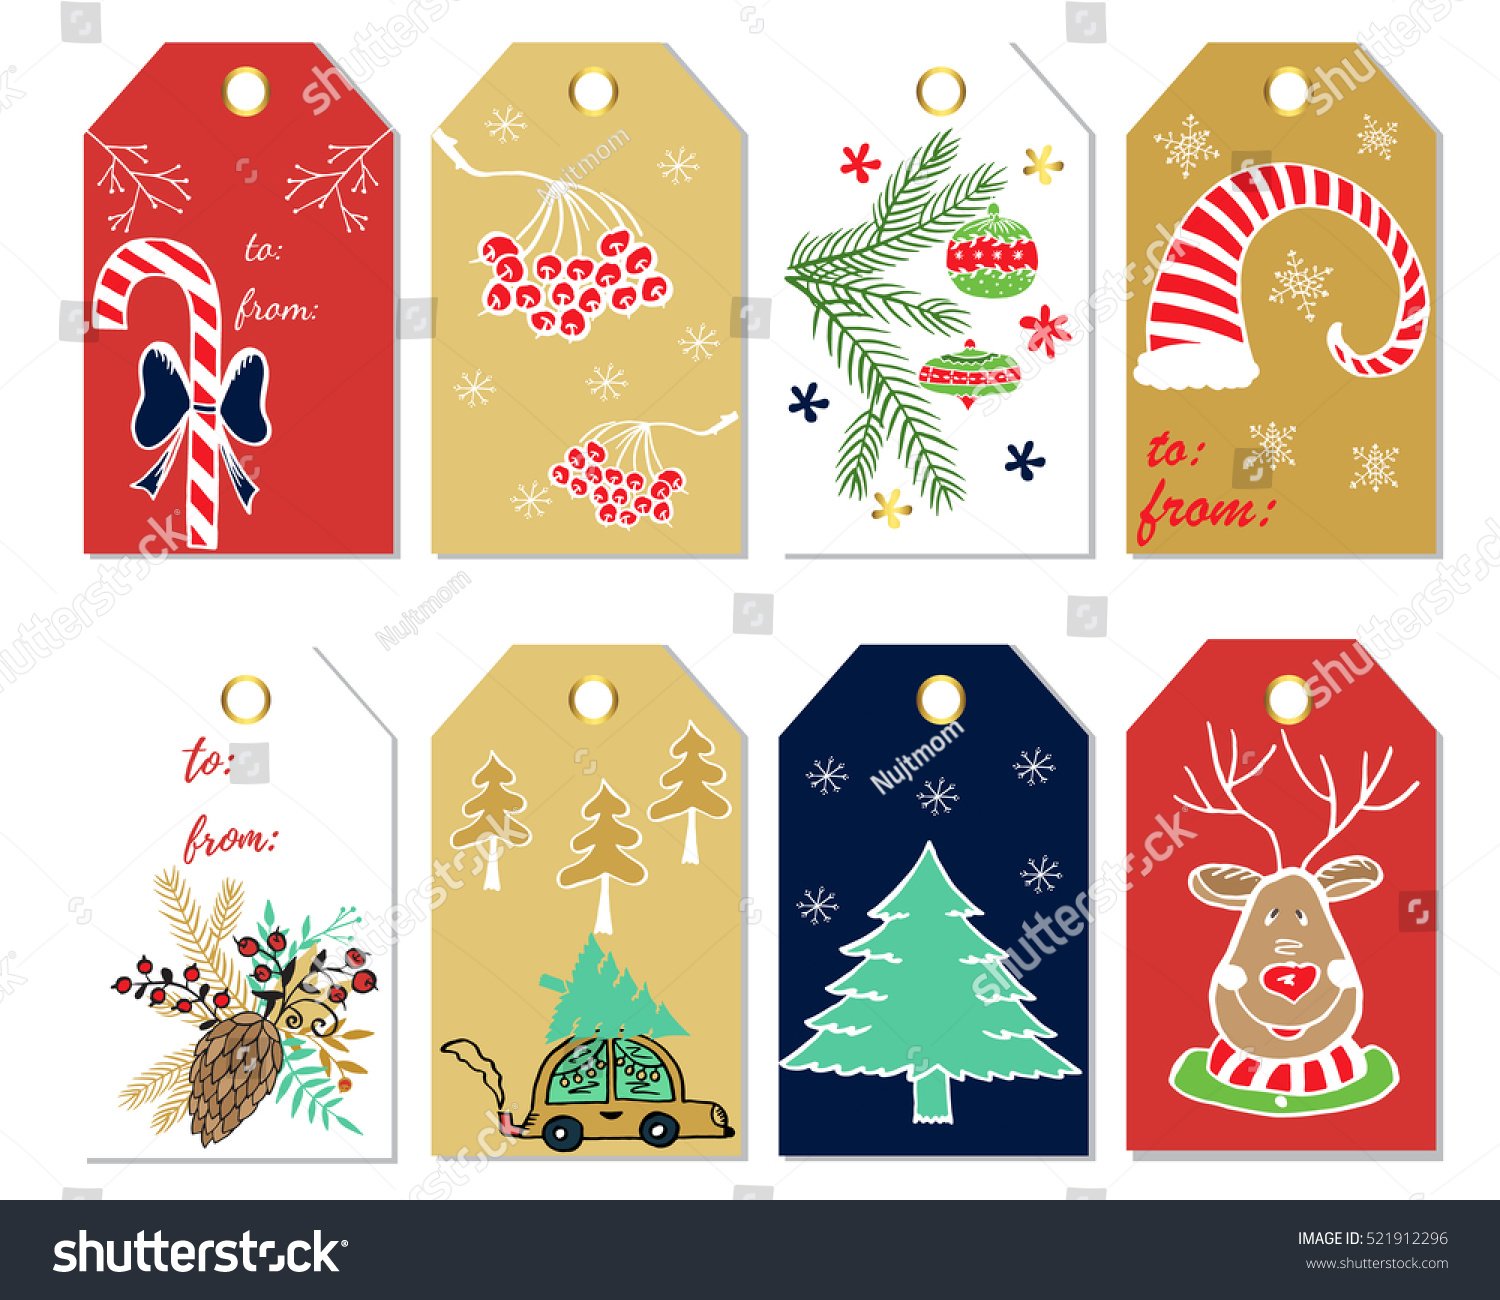 Christmas Labels Template from image.shutterstock.com